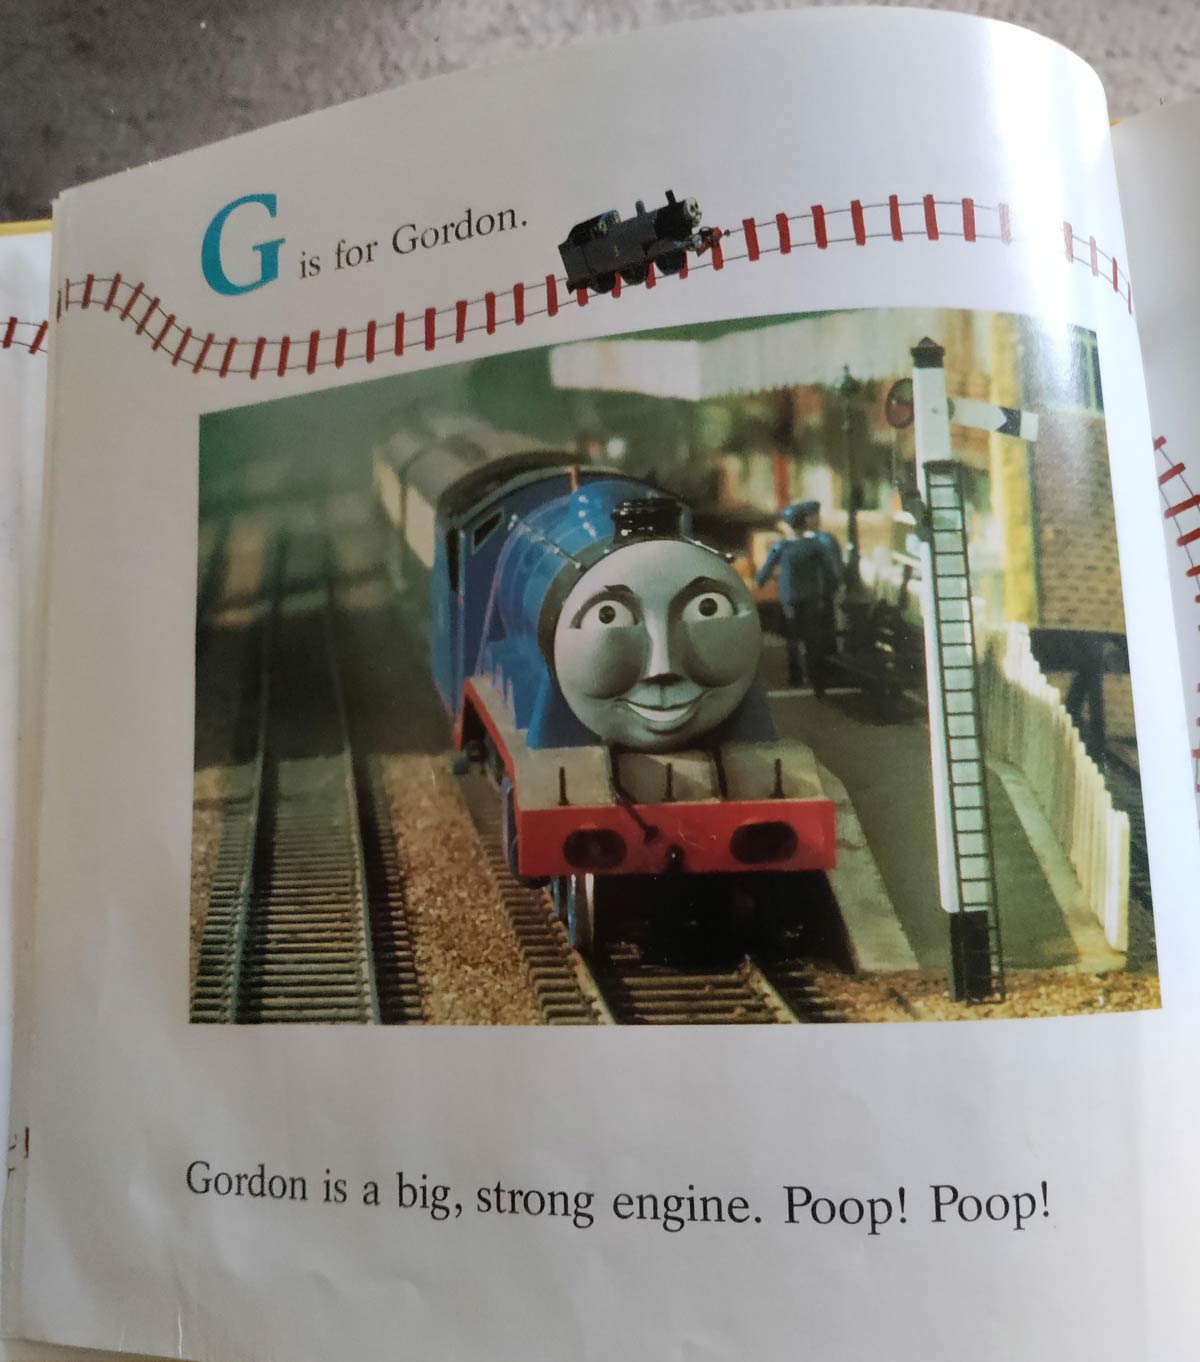 A Thomas the Tank Engine book from my childhood which used the word "poop" as an onomatopoeia. My brother and I would always giggle like idiots when our mom read it to us